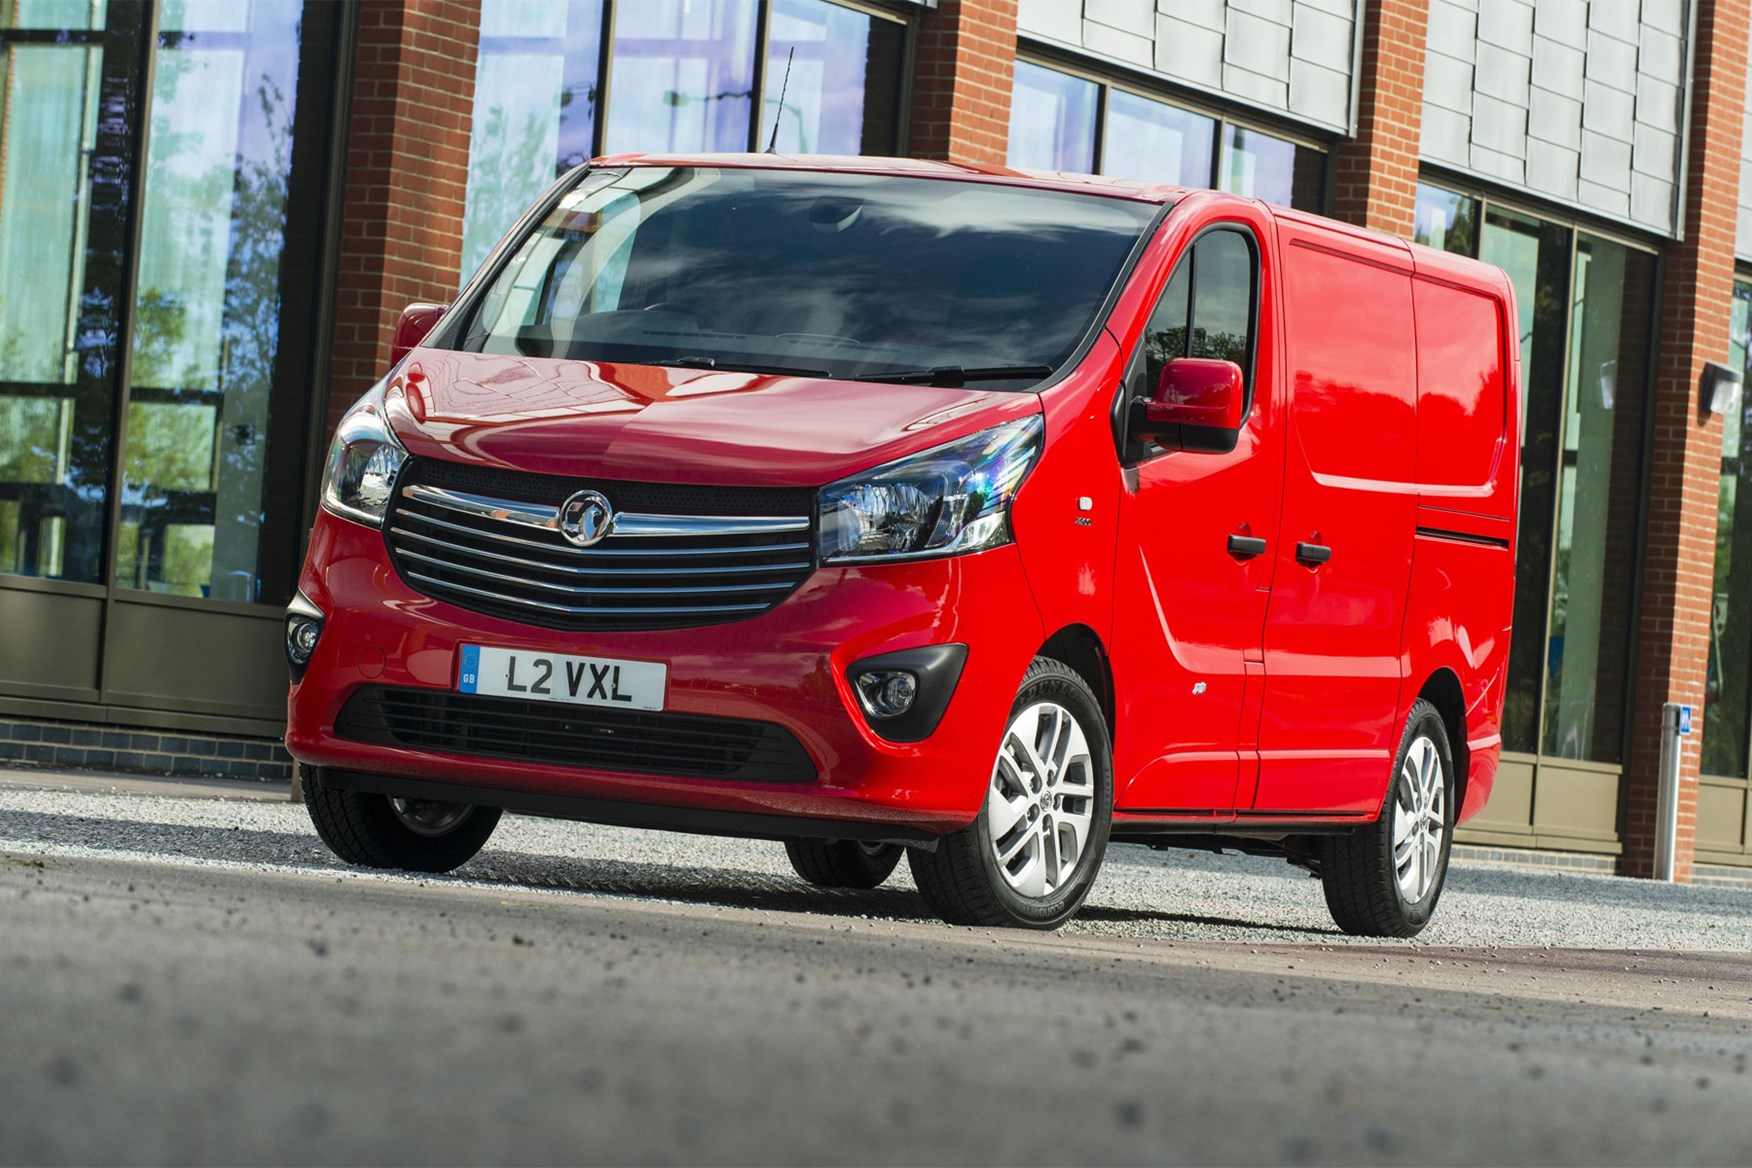 Vauxhall Vivaro review - front view, red